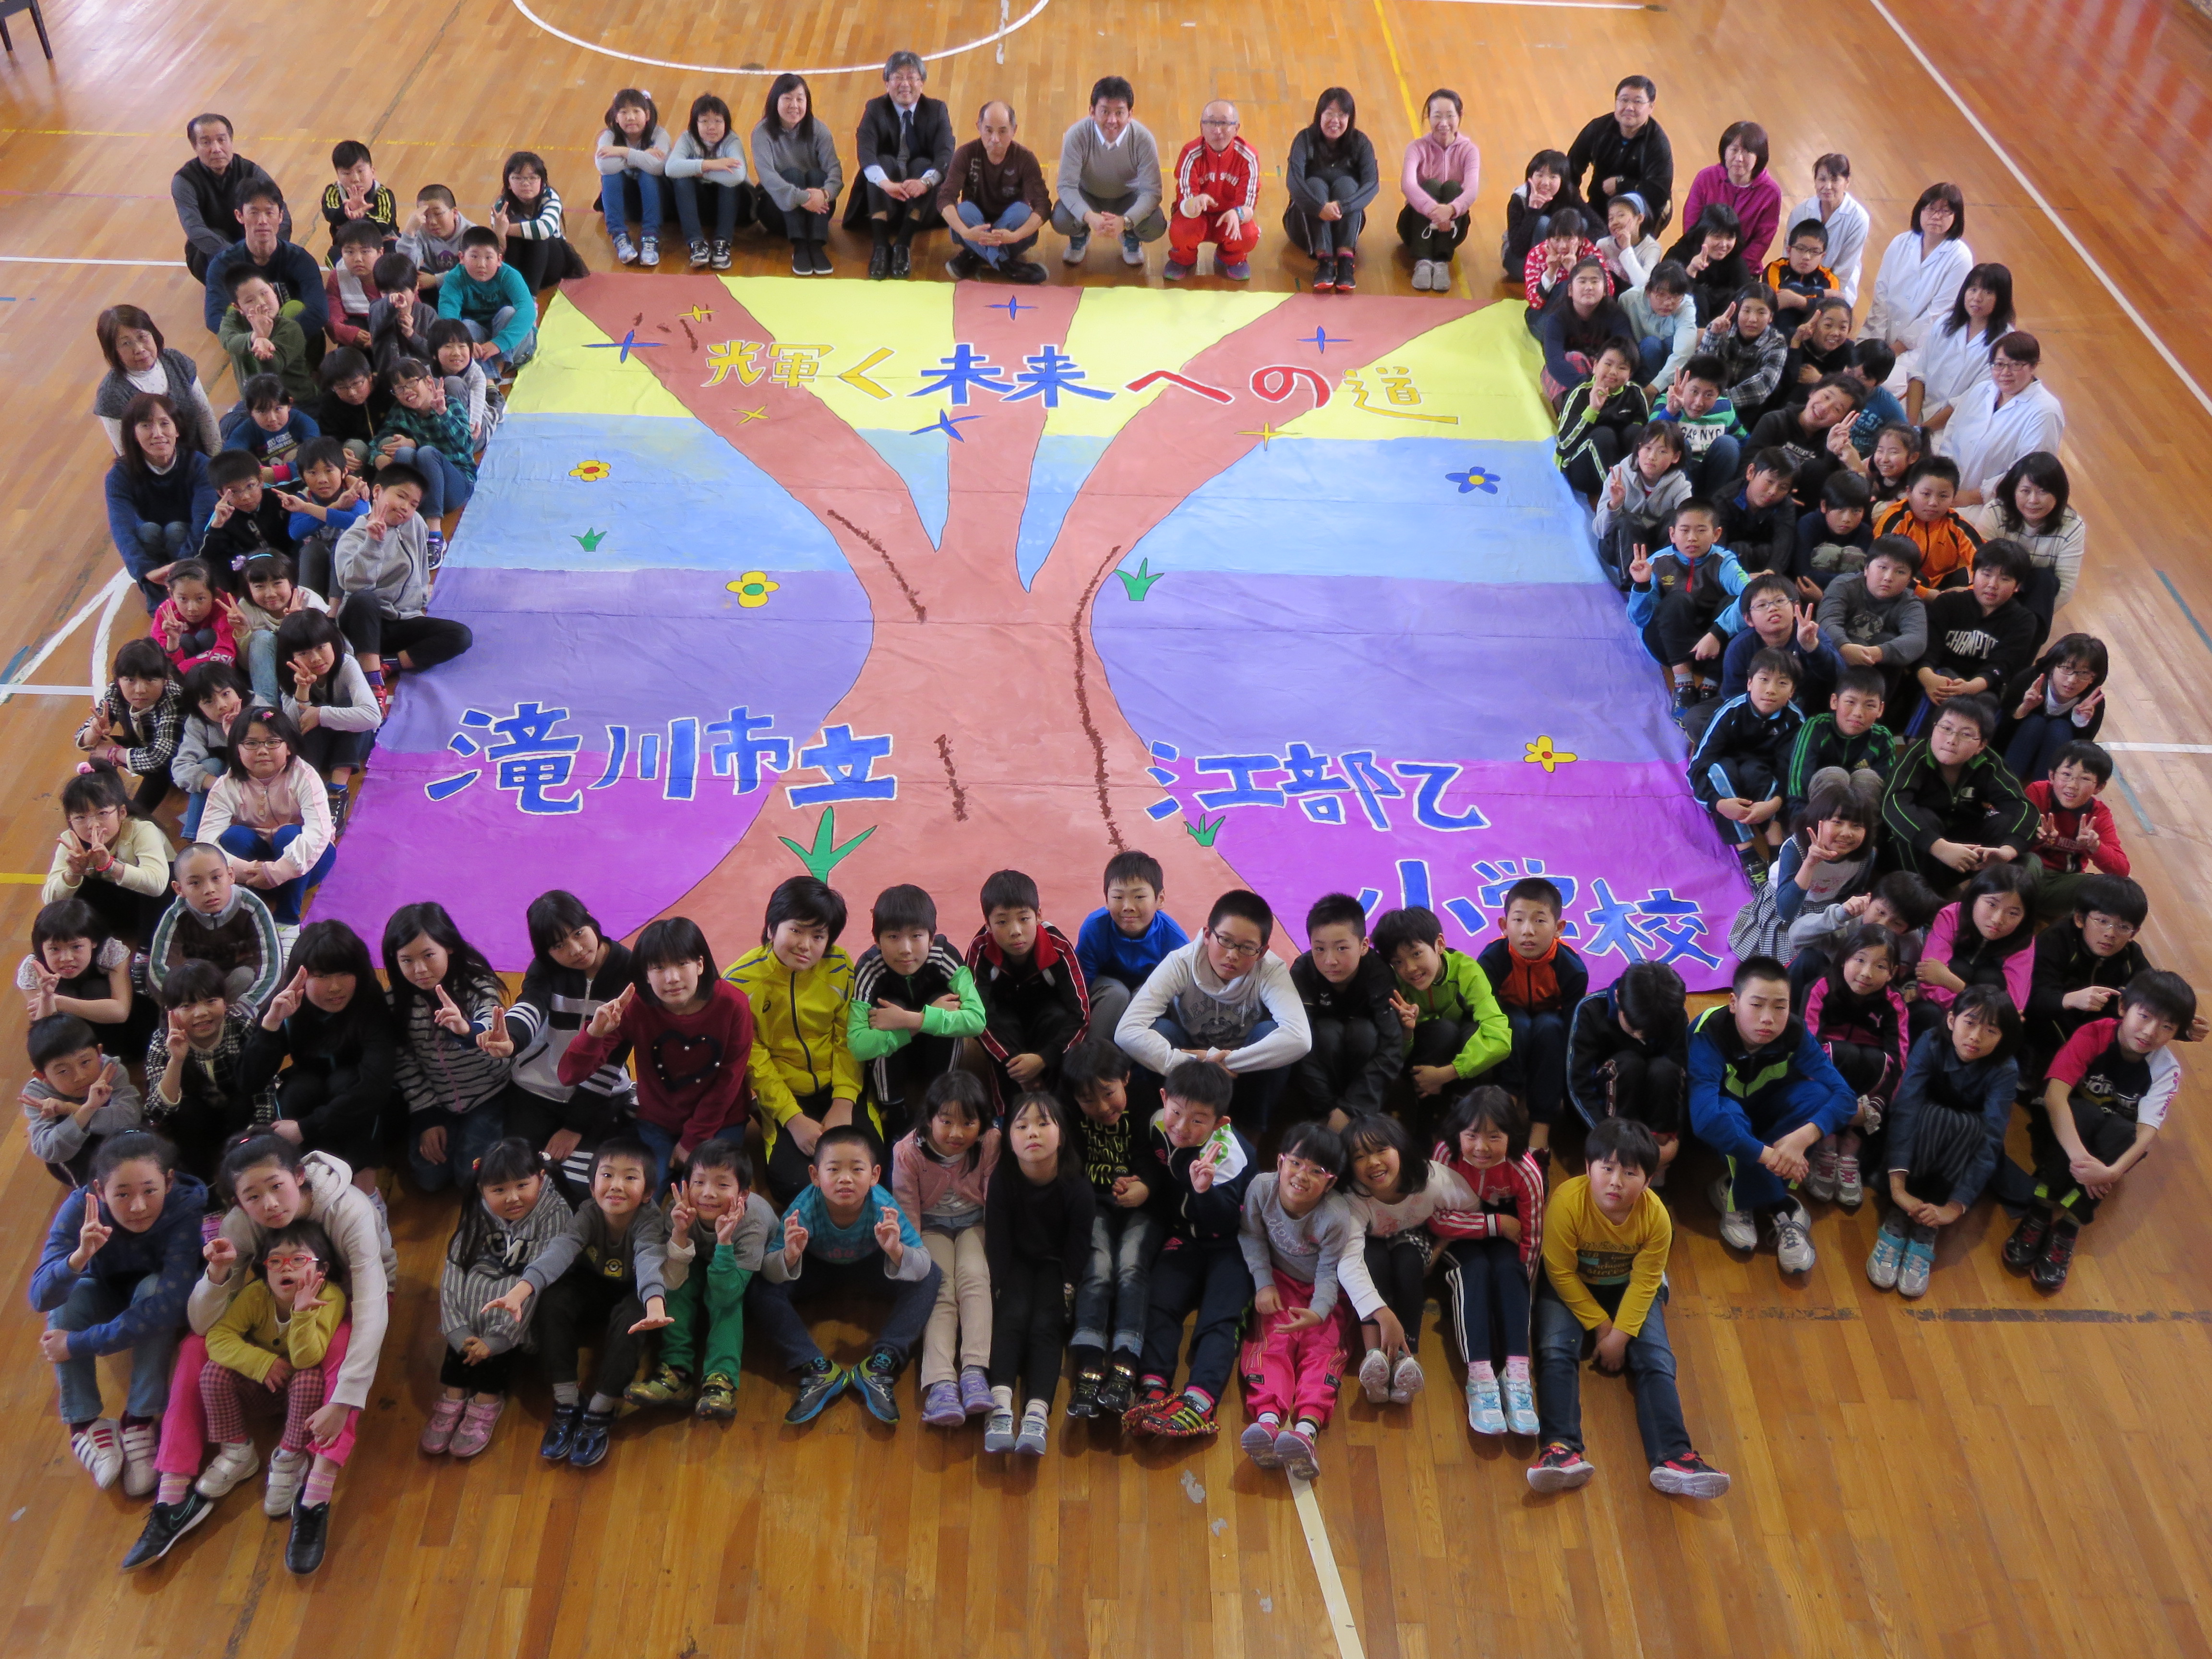 The Biggest Painting in the World 2020 Takigawa City was completed